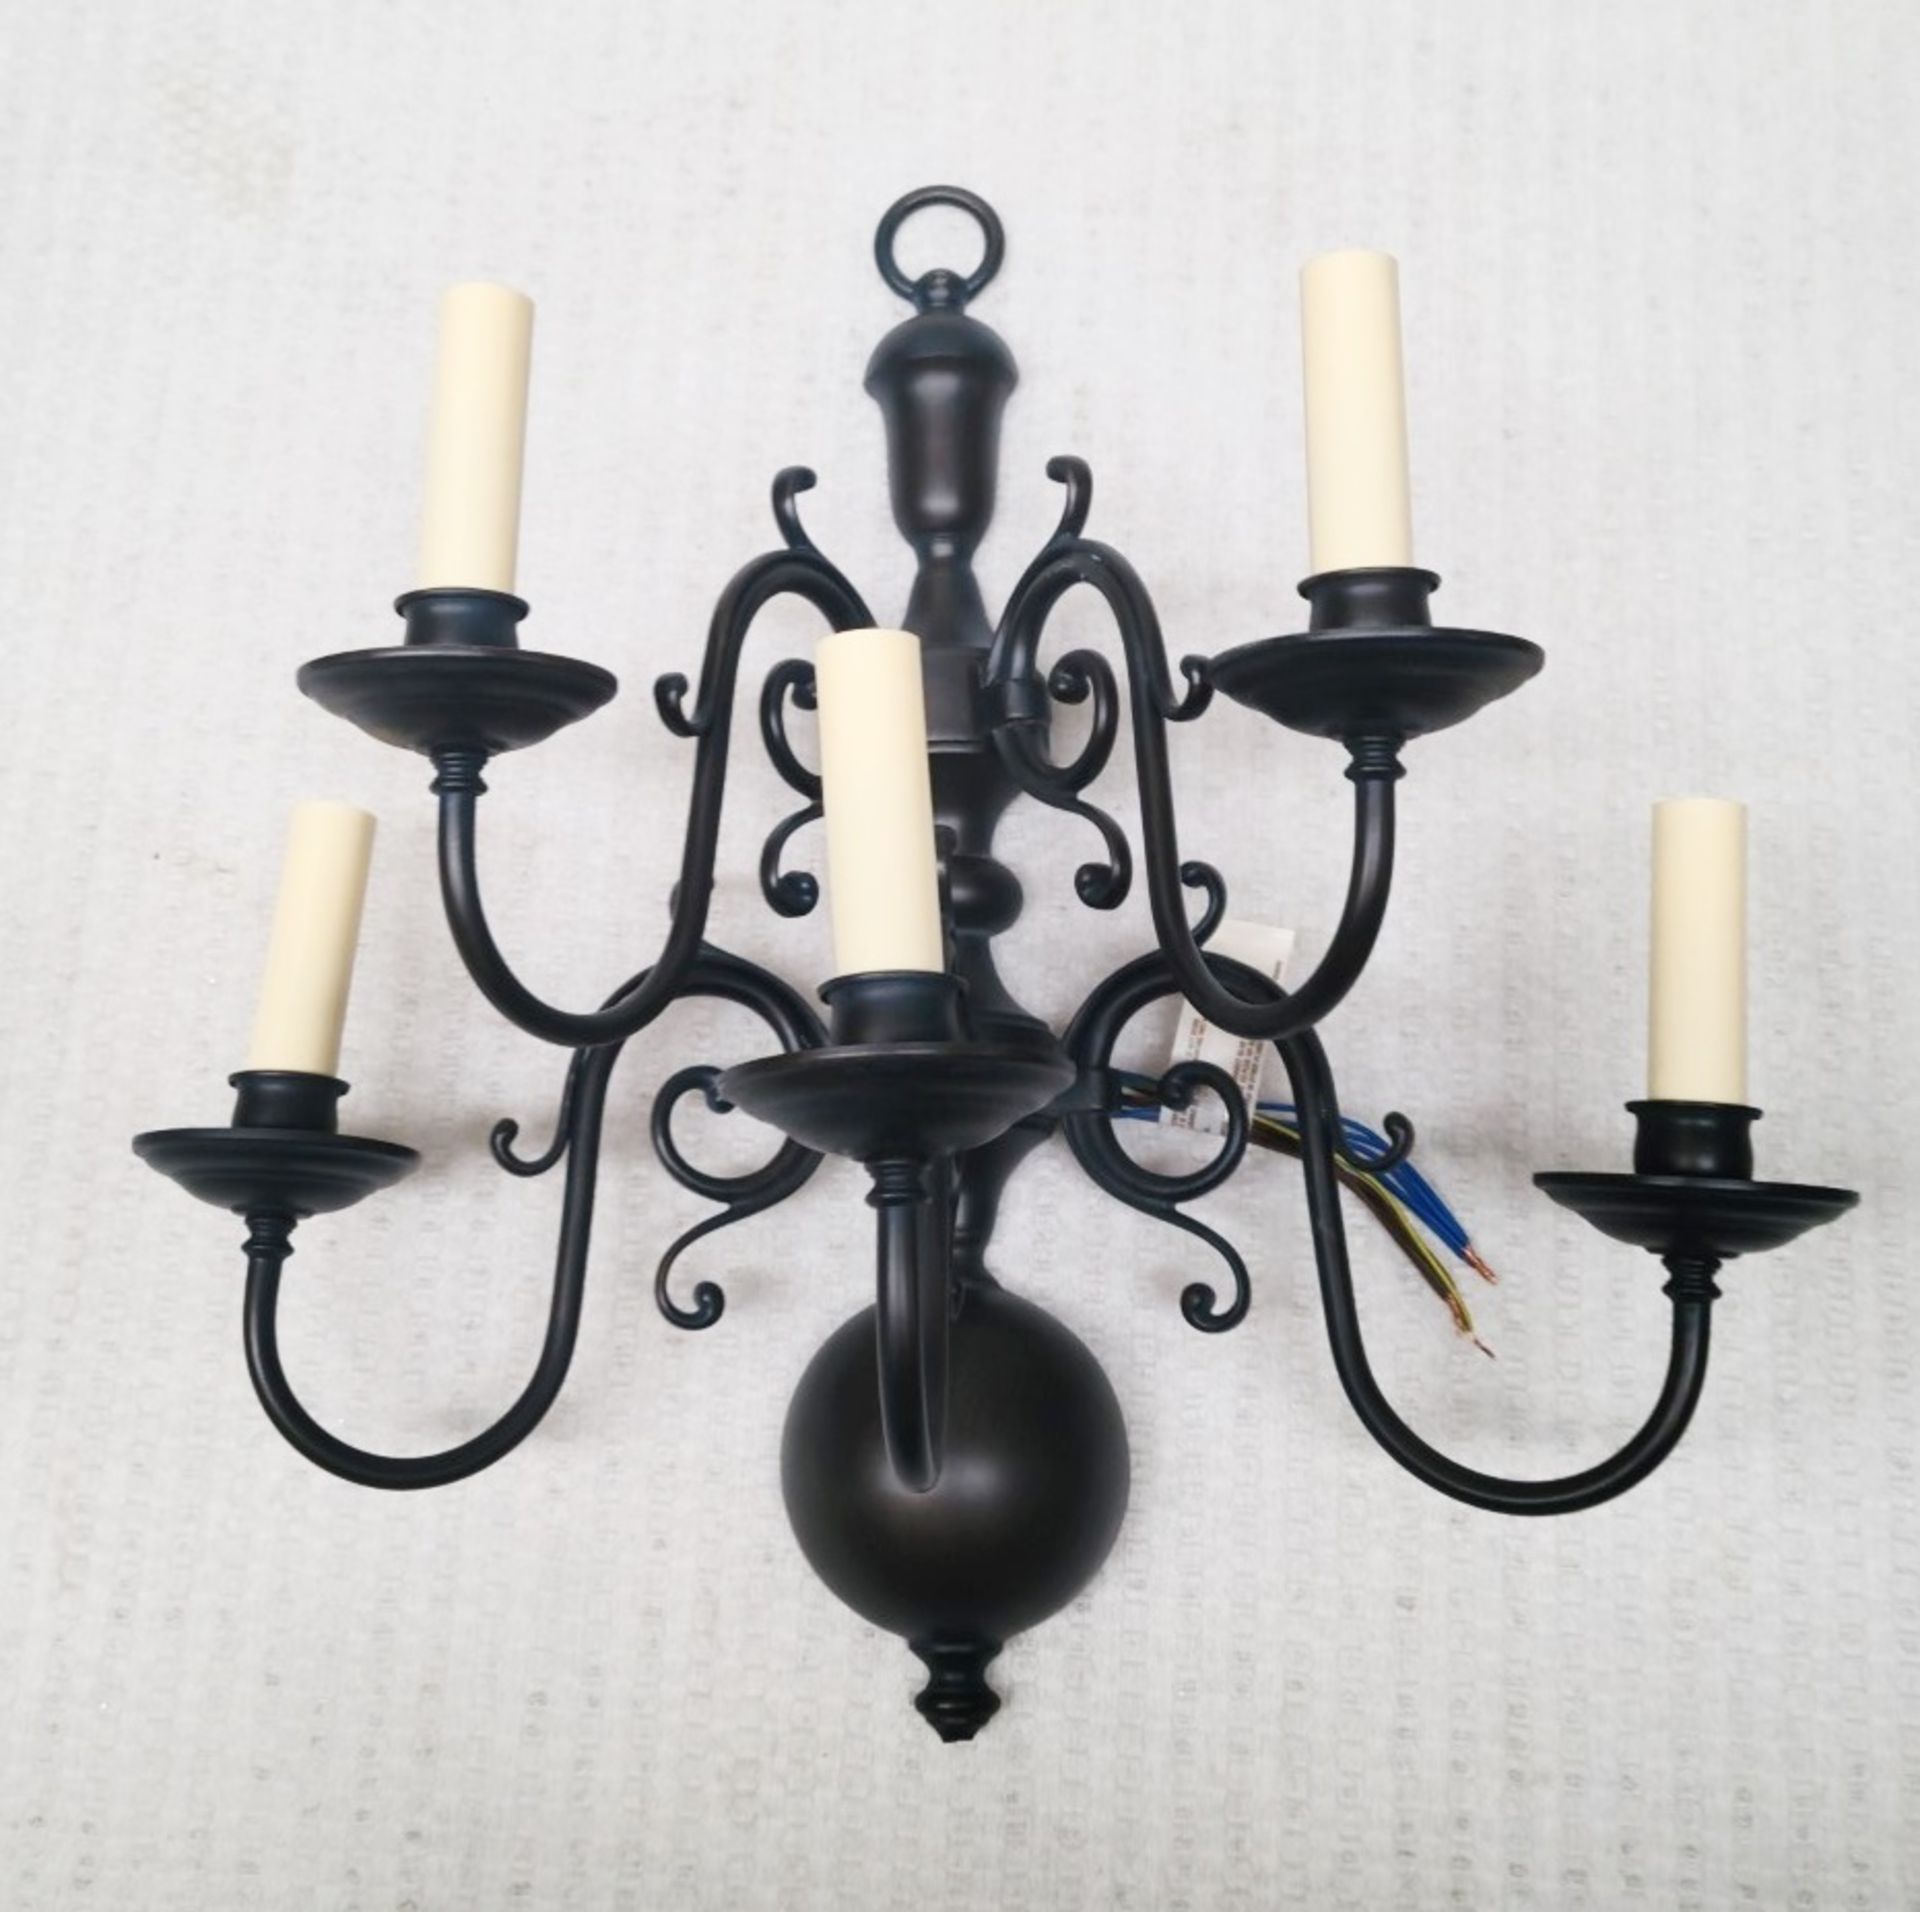 1 x CHELSOM Flemish Style 5 Light Dark Bronze Wall Sconce, With Outswept Curling Arms & Drip Pans - Image 2 of 2